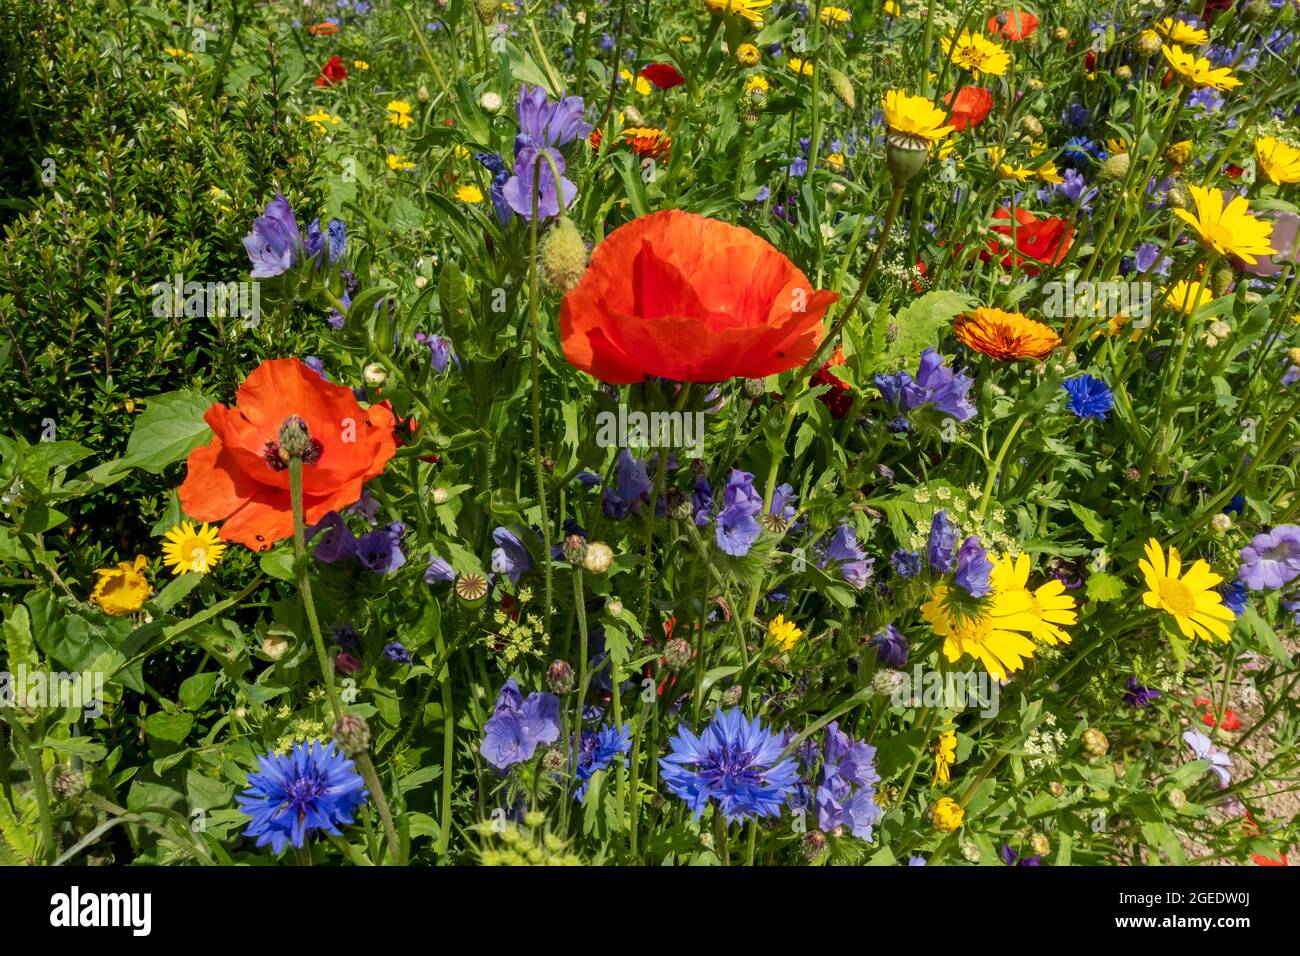 Close up of red poppy poppies yellow corn marigolds and blue cornflowers wildflowers flowers in a garden border in summer England UK United Kingdom GB Stock Photo